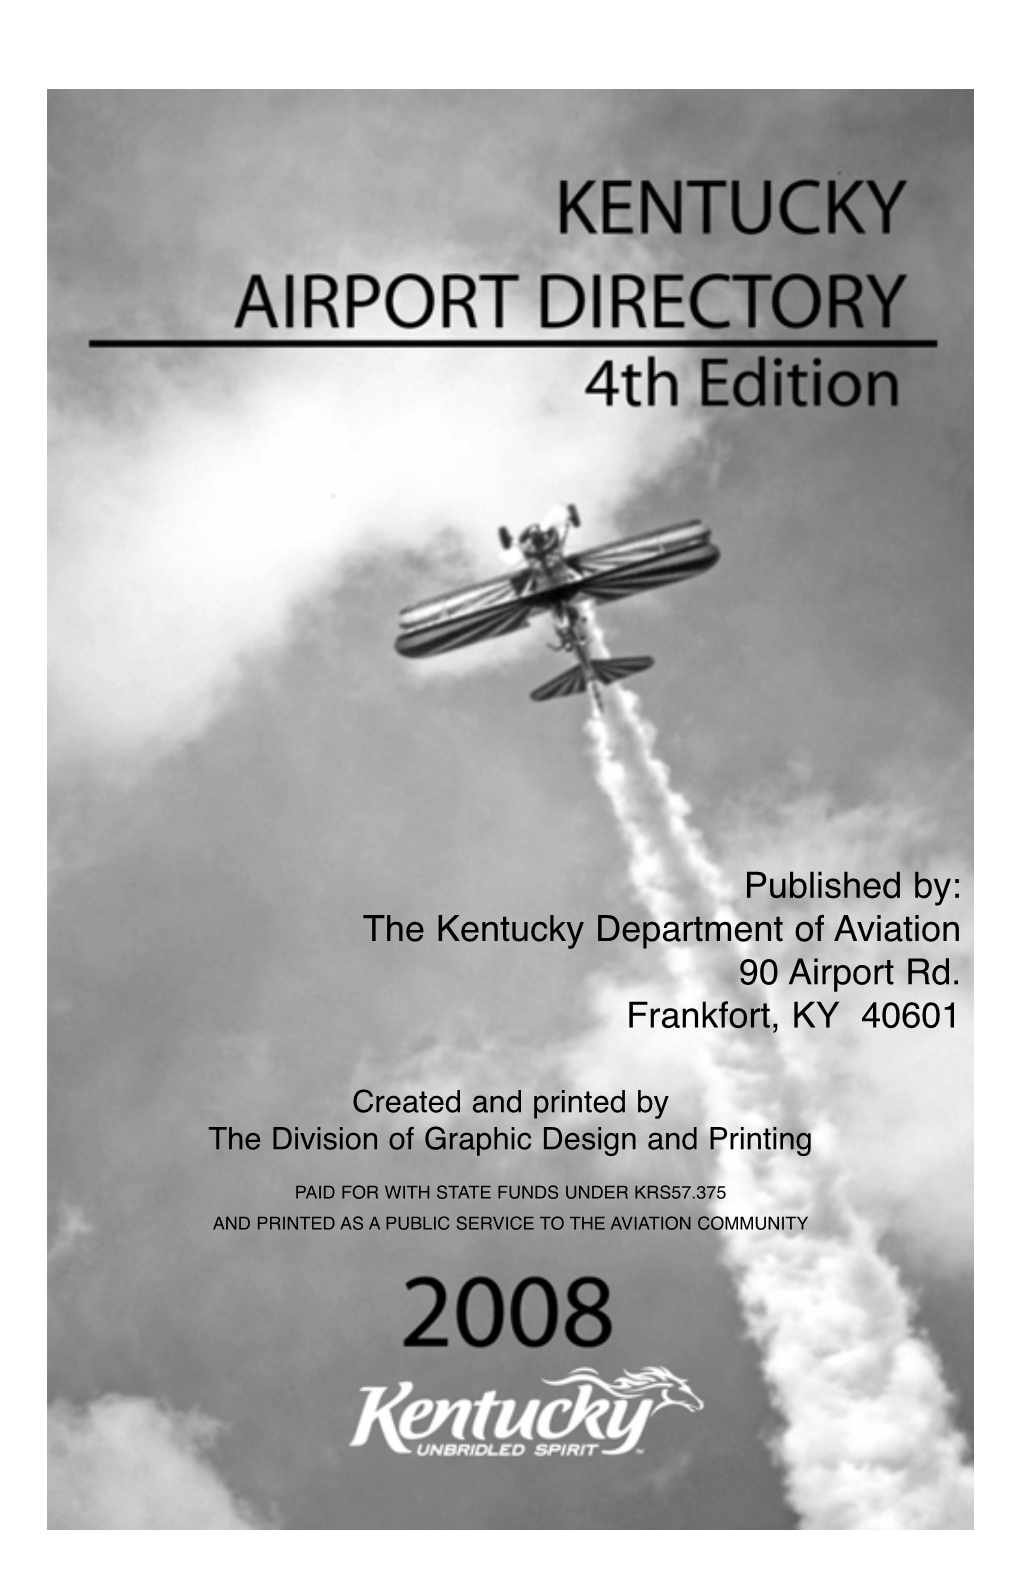 The Kentucky Department of Aviation 90 Airport Rd. Frankfort, KY 40601